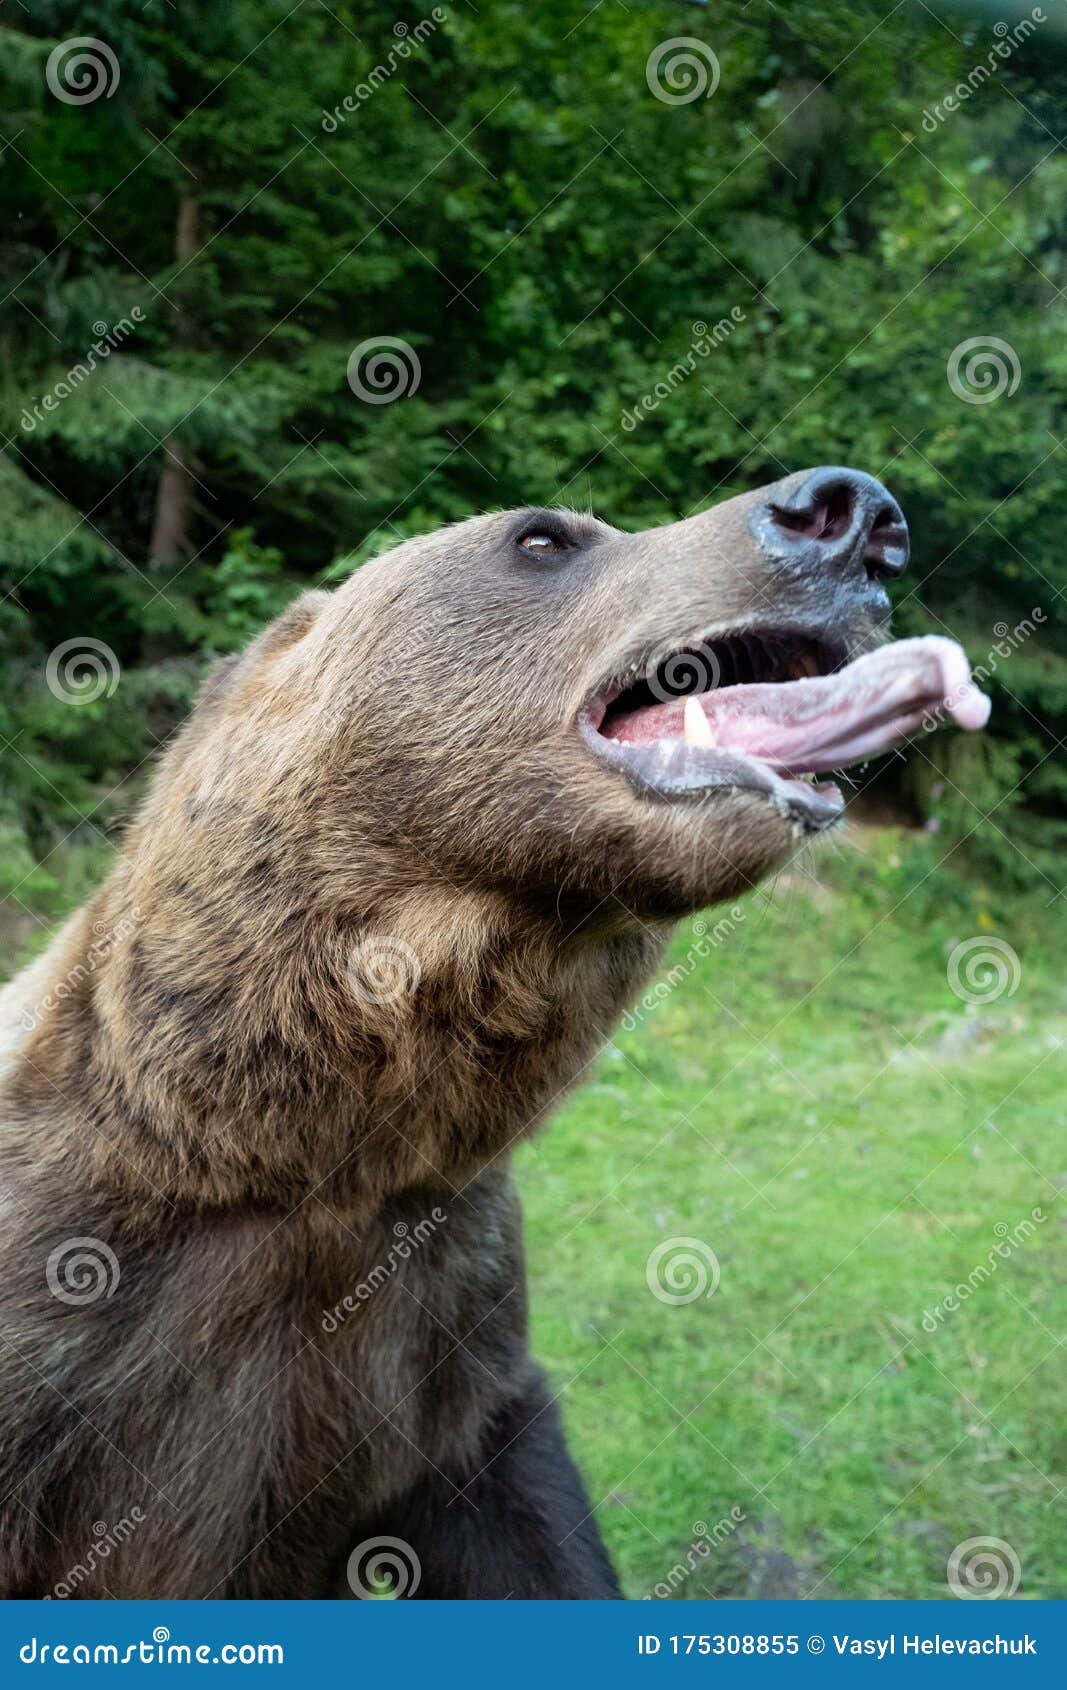 bear opened its mouth, and warn the person about the attack